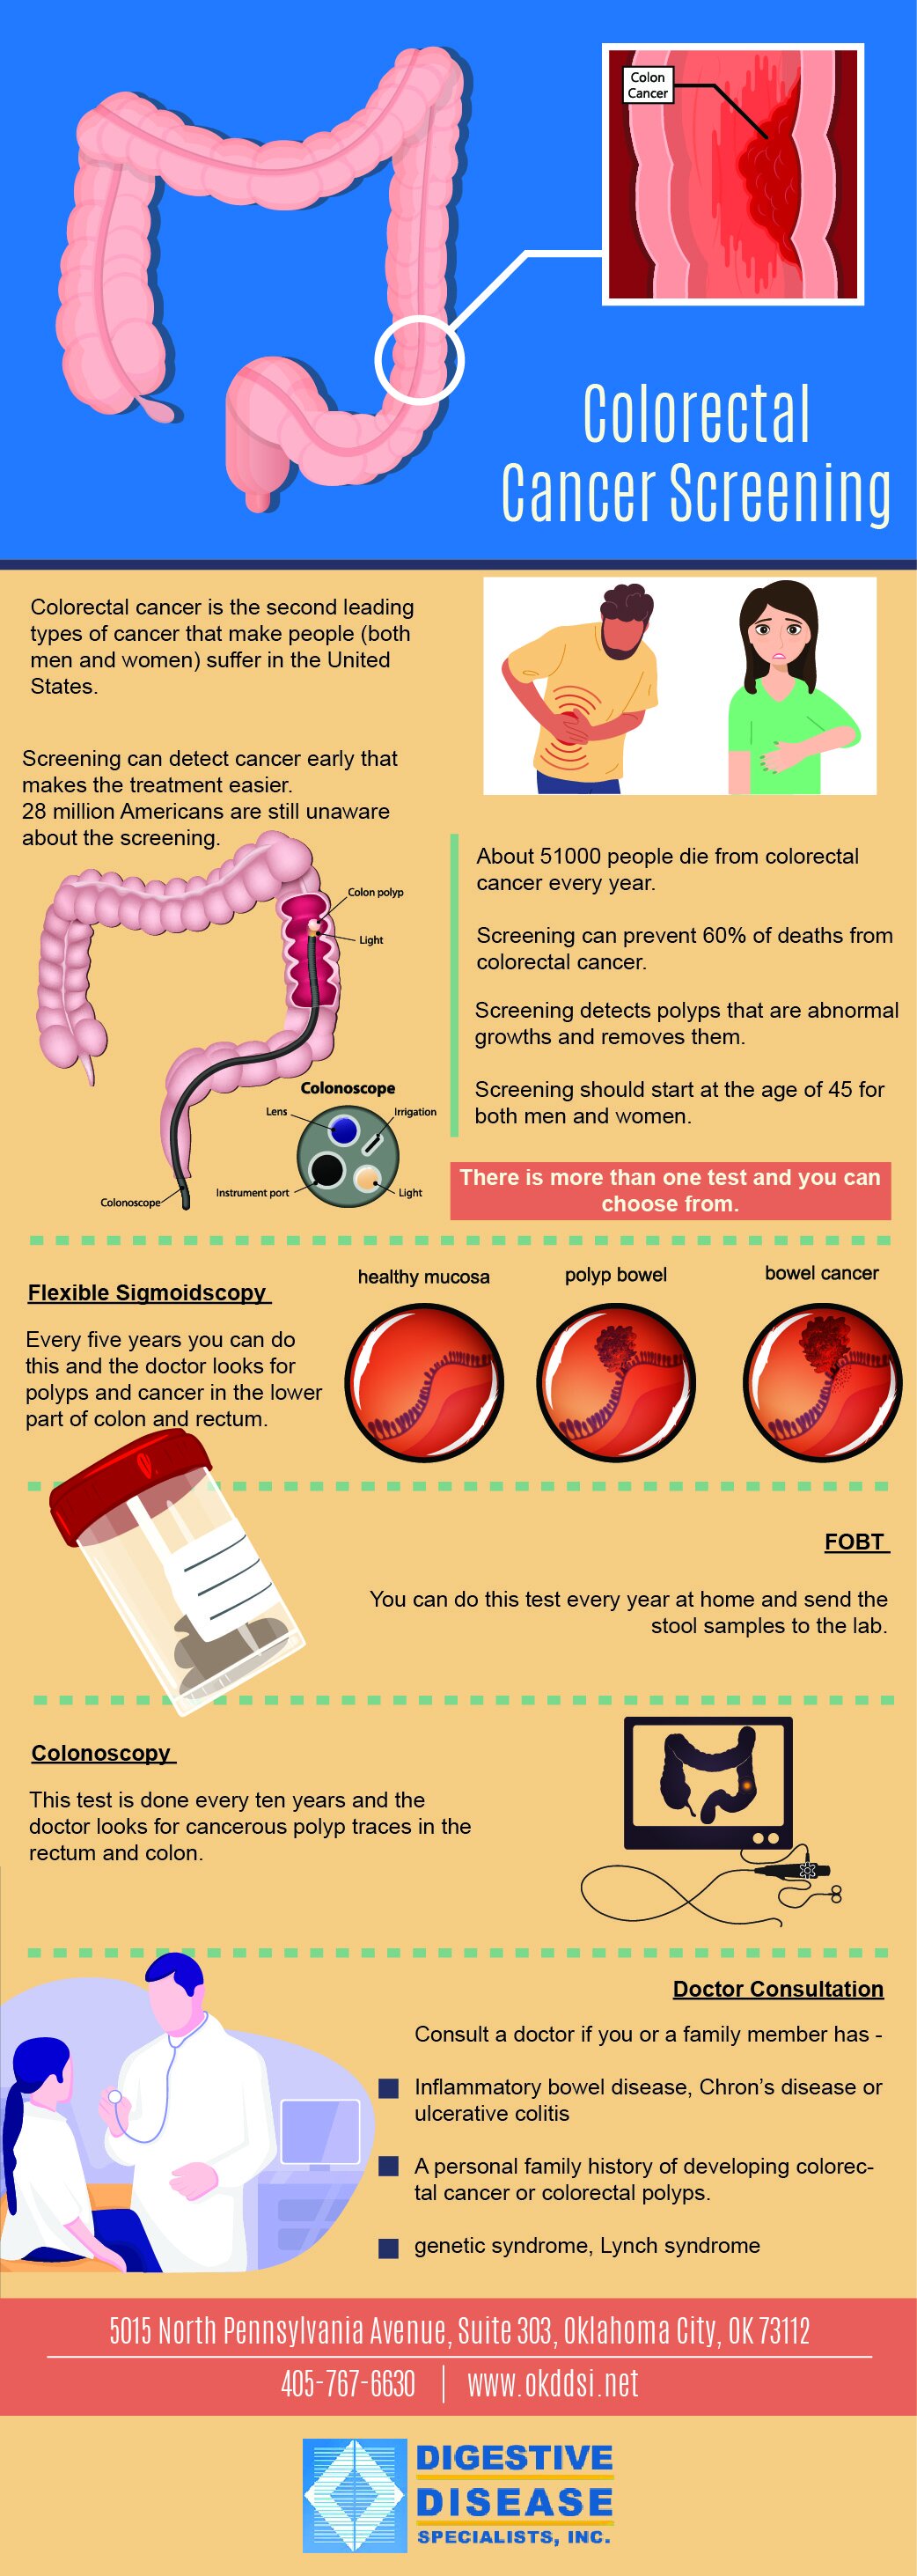 Colorectal Cancer Screening Infographic